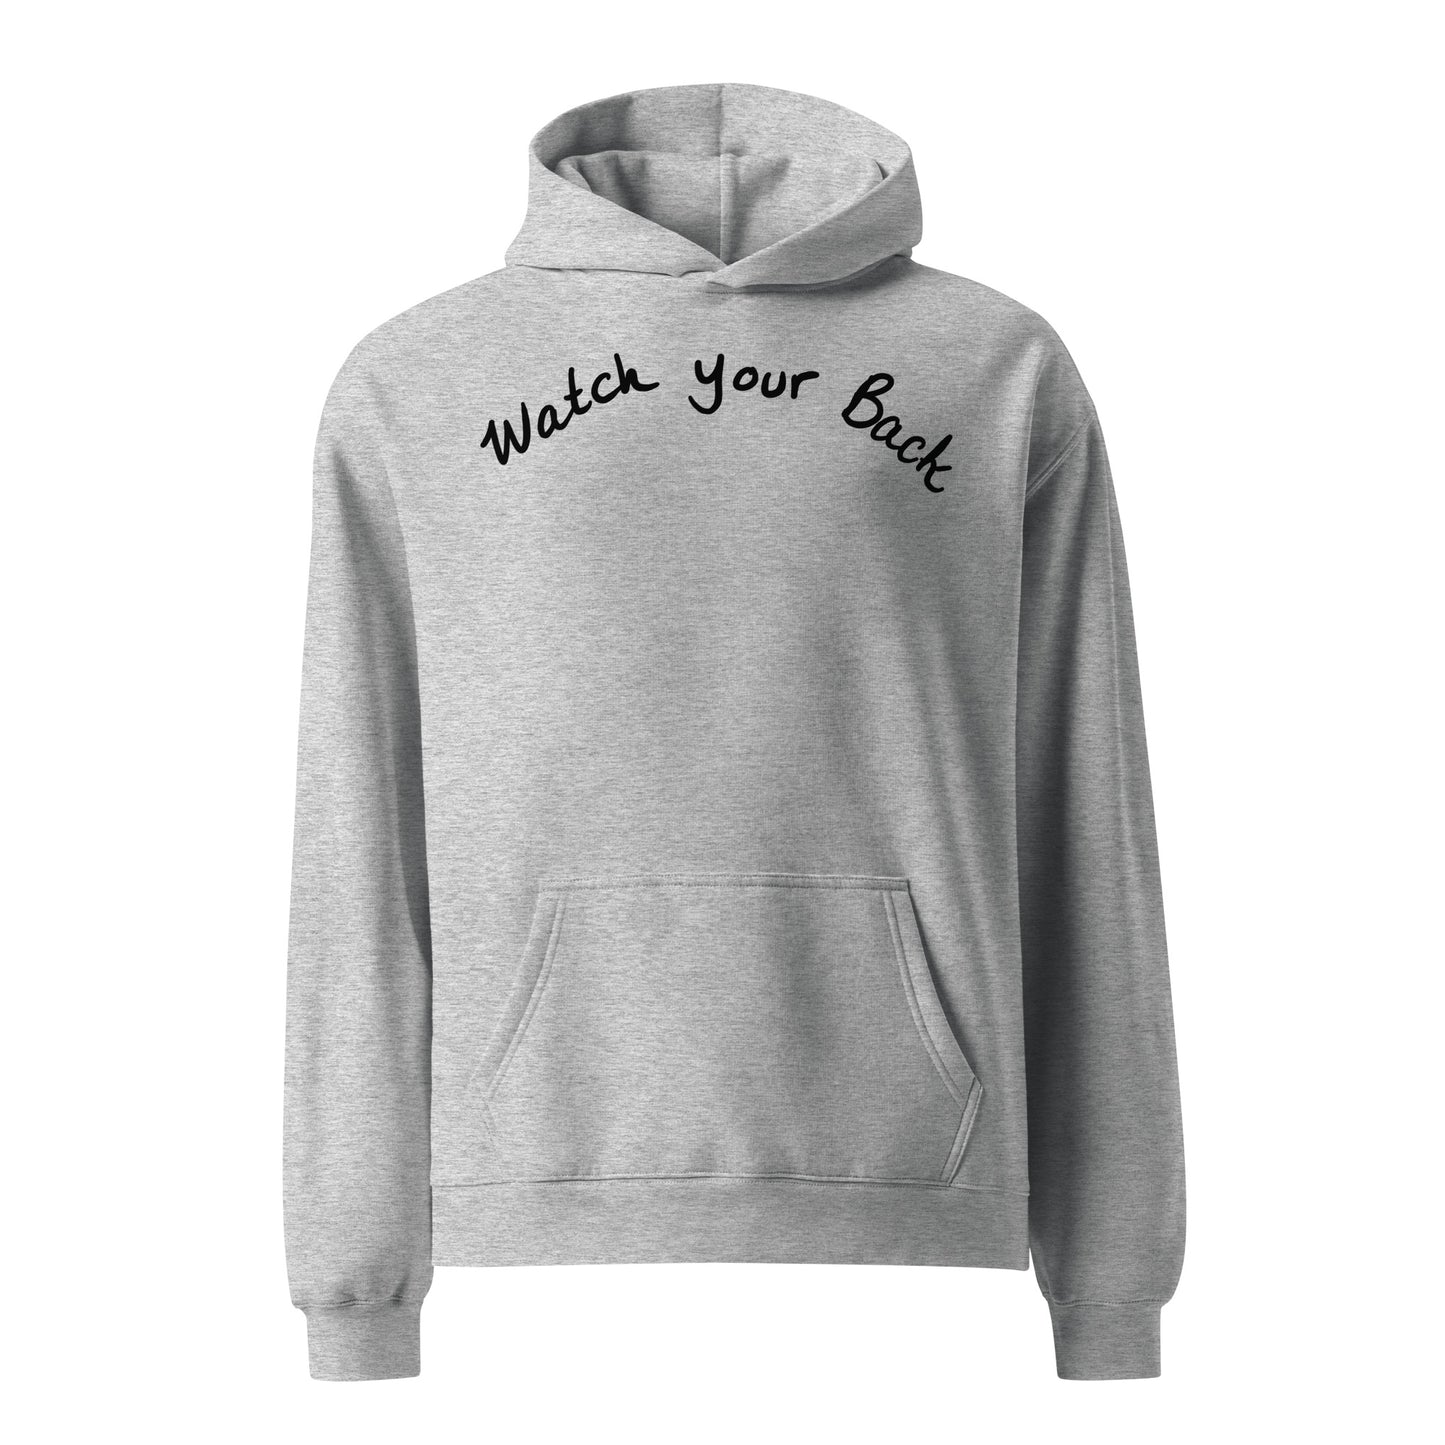 " Watch Your Back " Unisex oversized hoodie